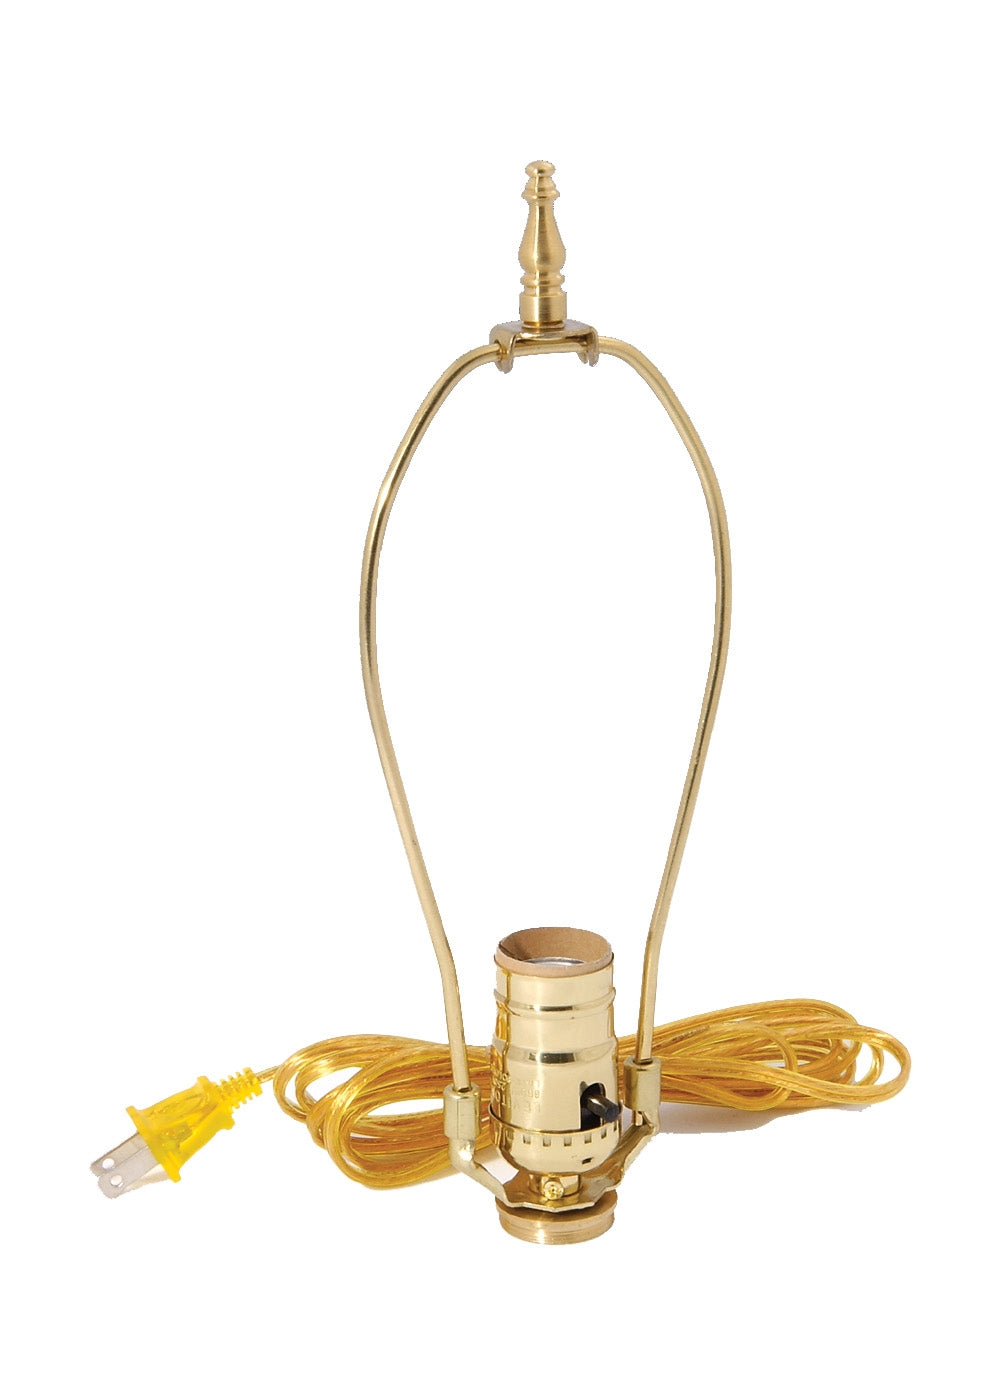 B&p Lamp #2 Oil to Elec. Adapter with Clear Gold Cord